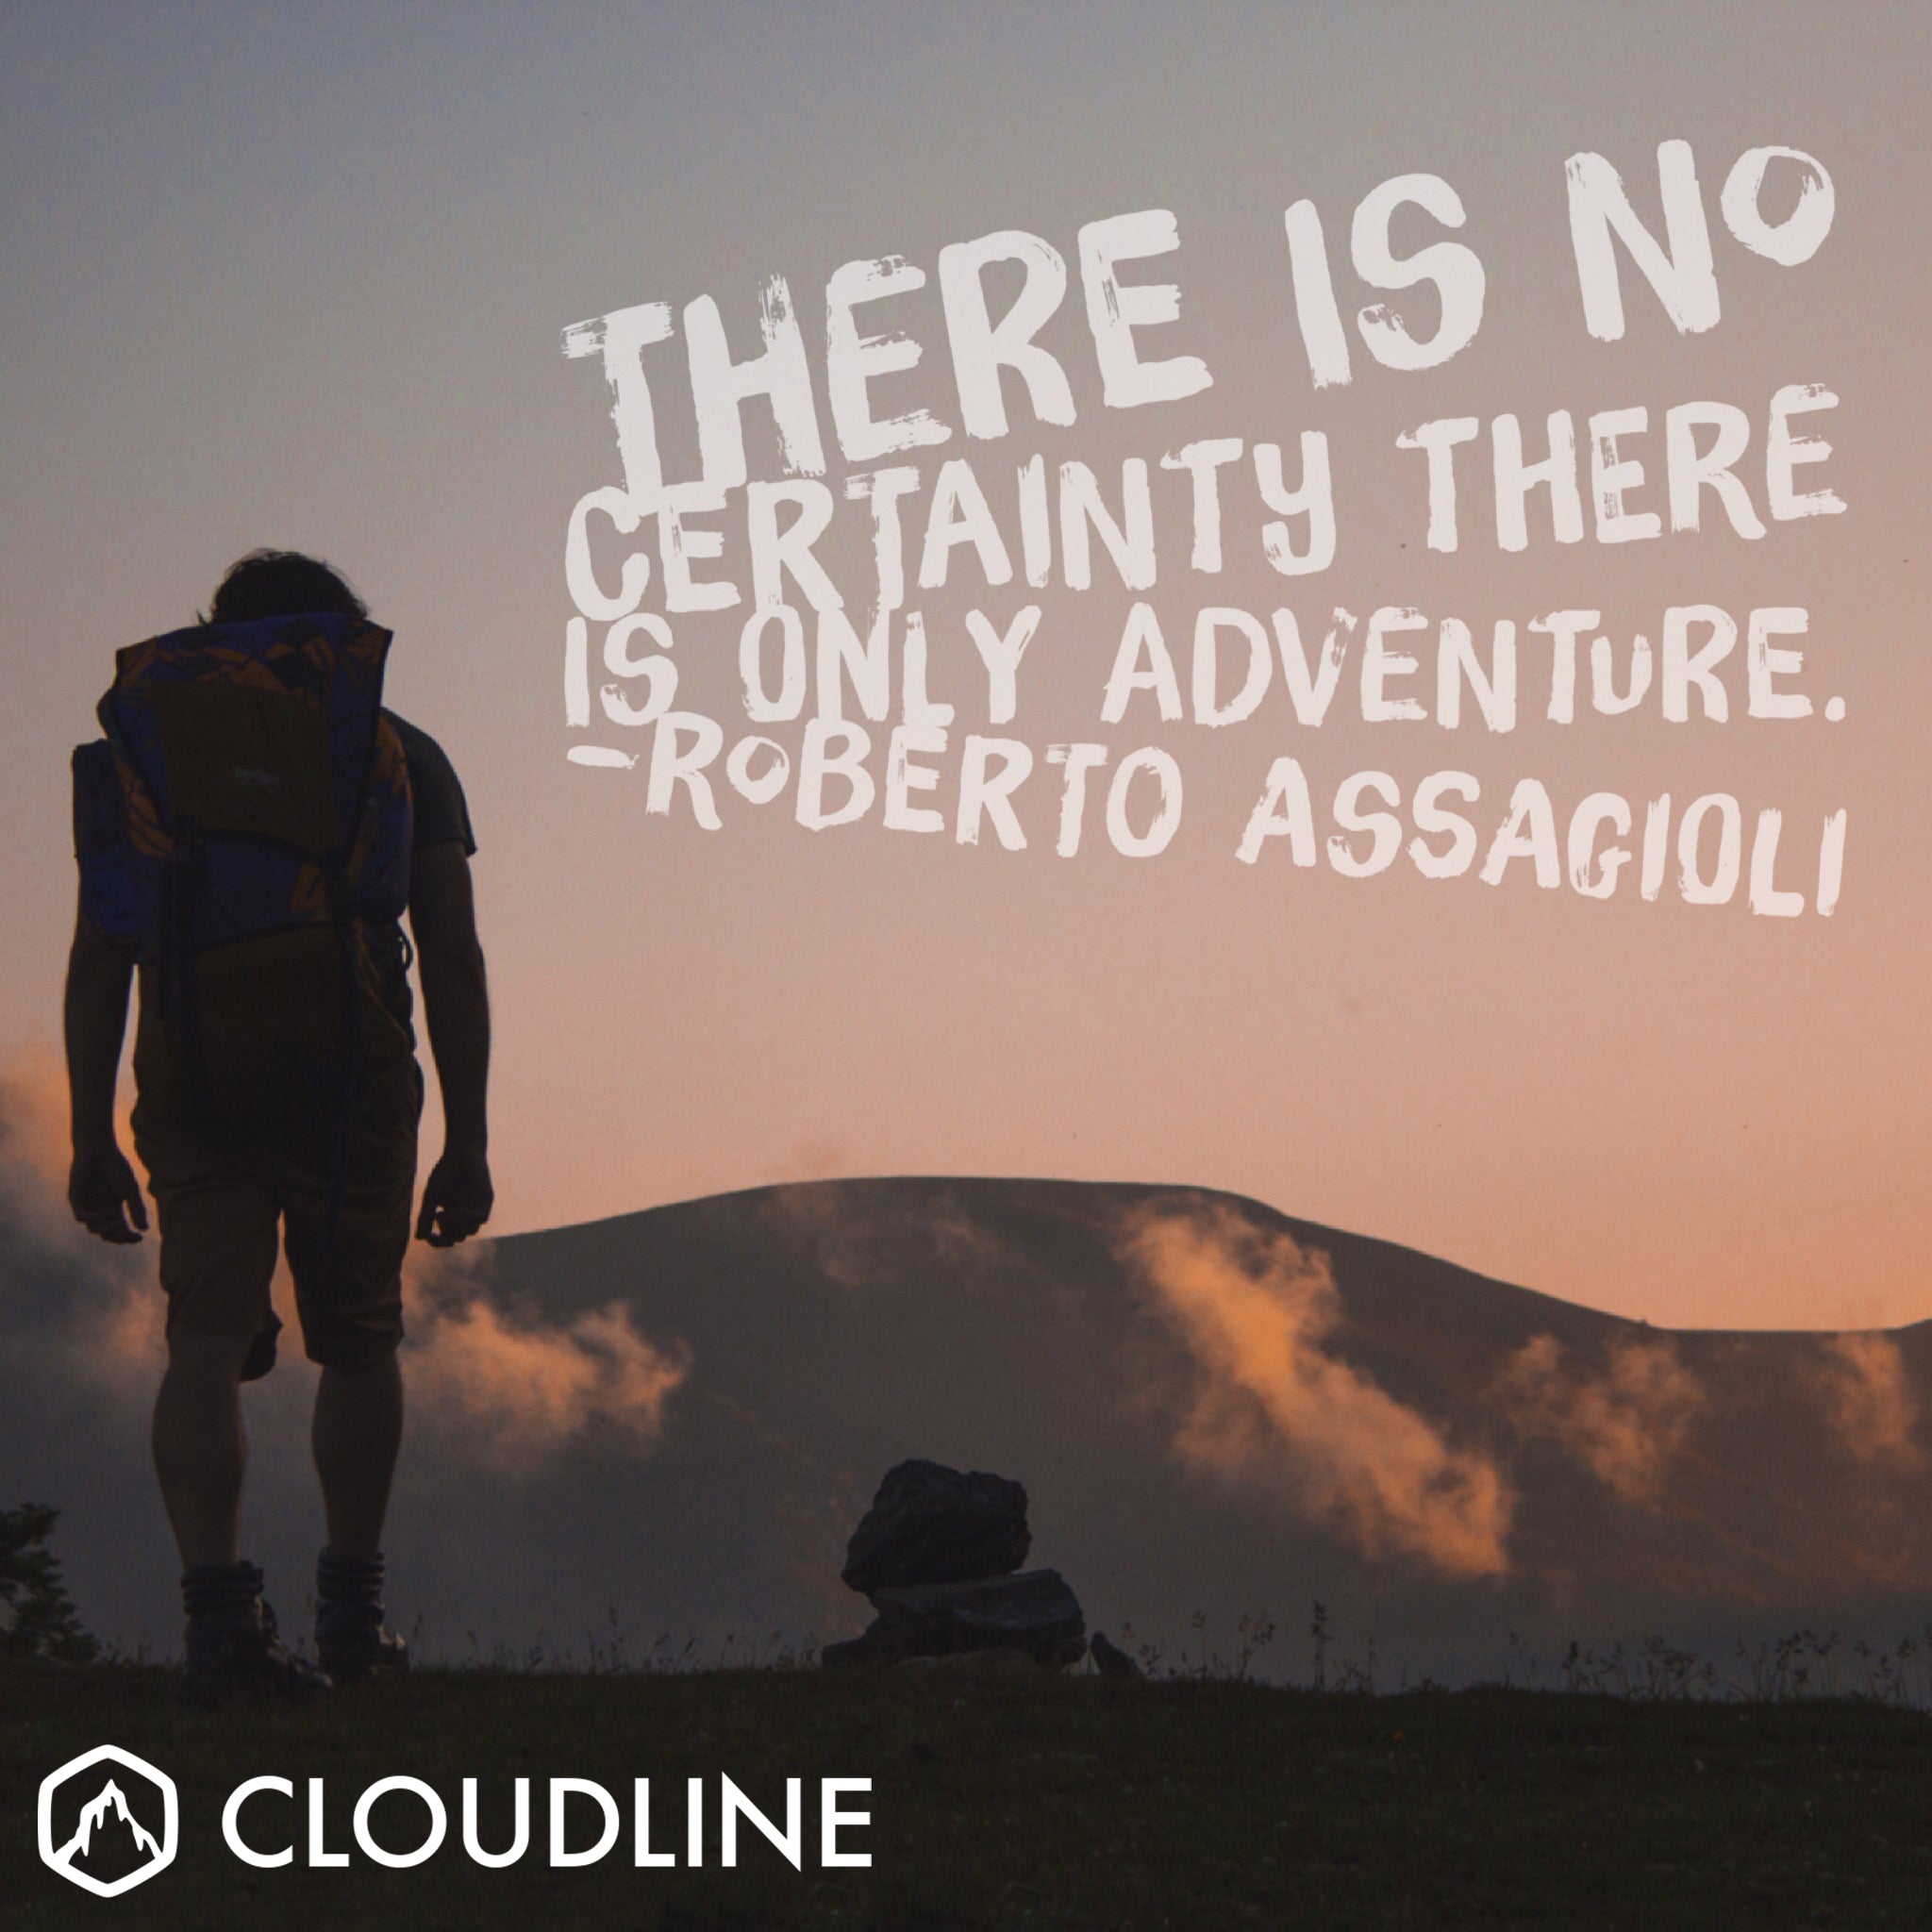 There is no certainty there is only adventure - Roberto Assagioli